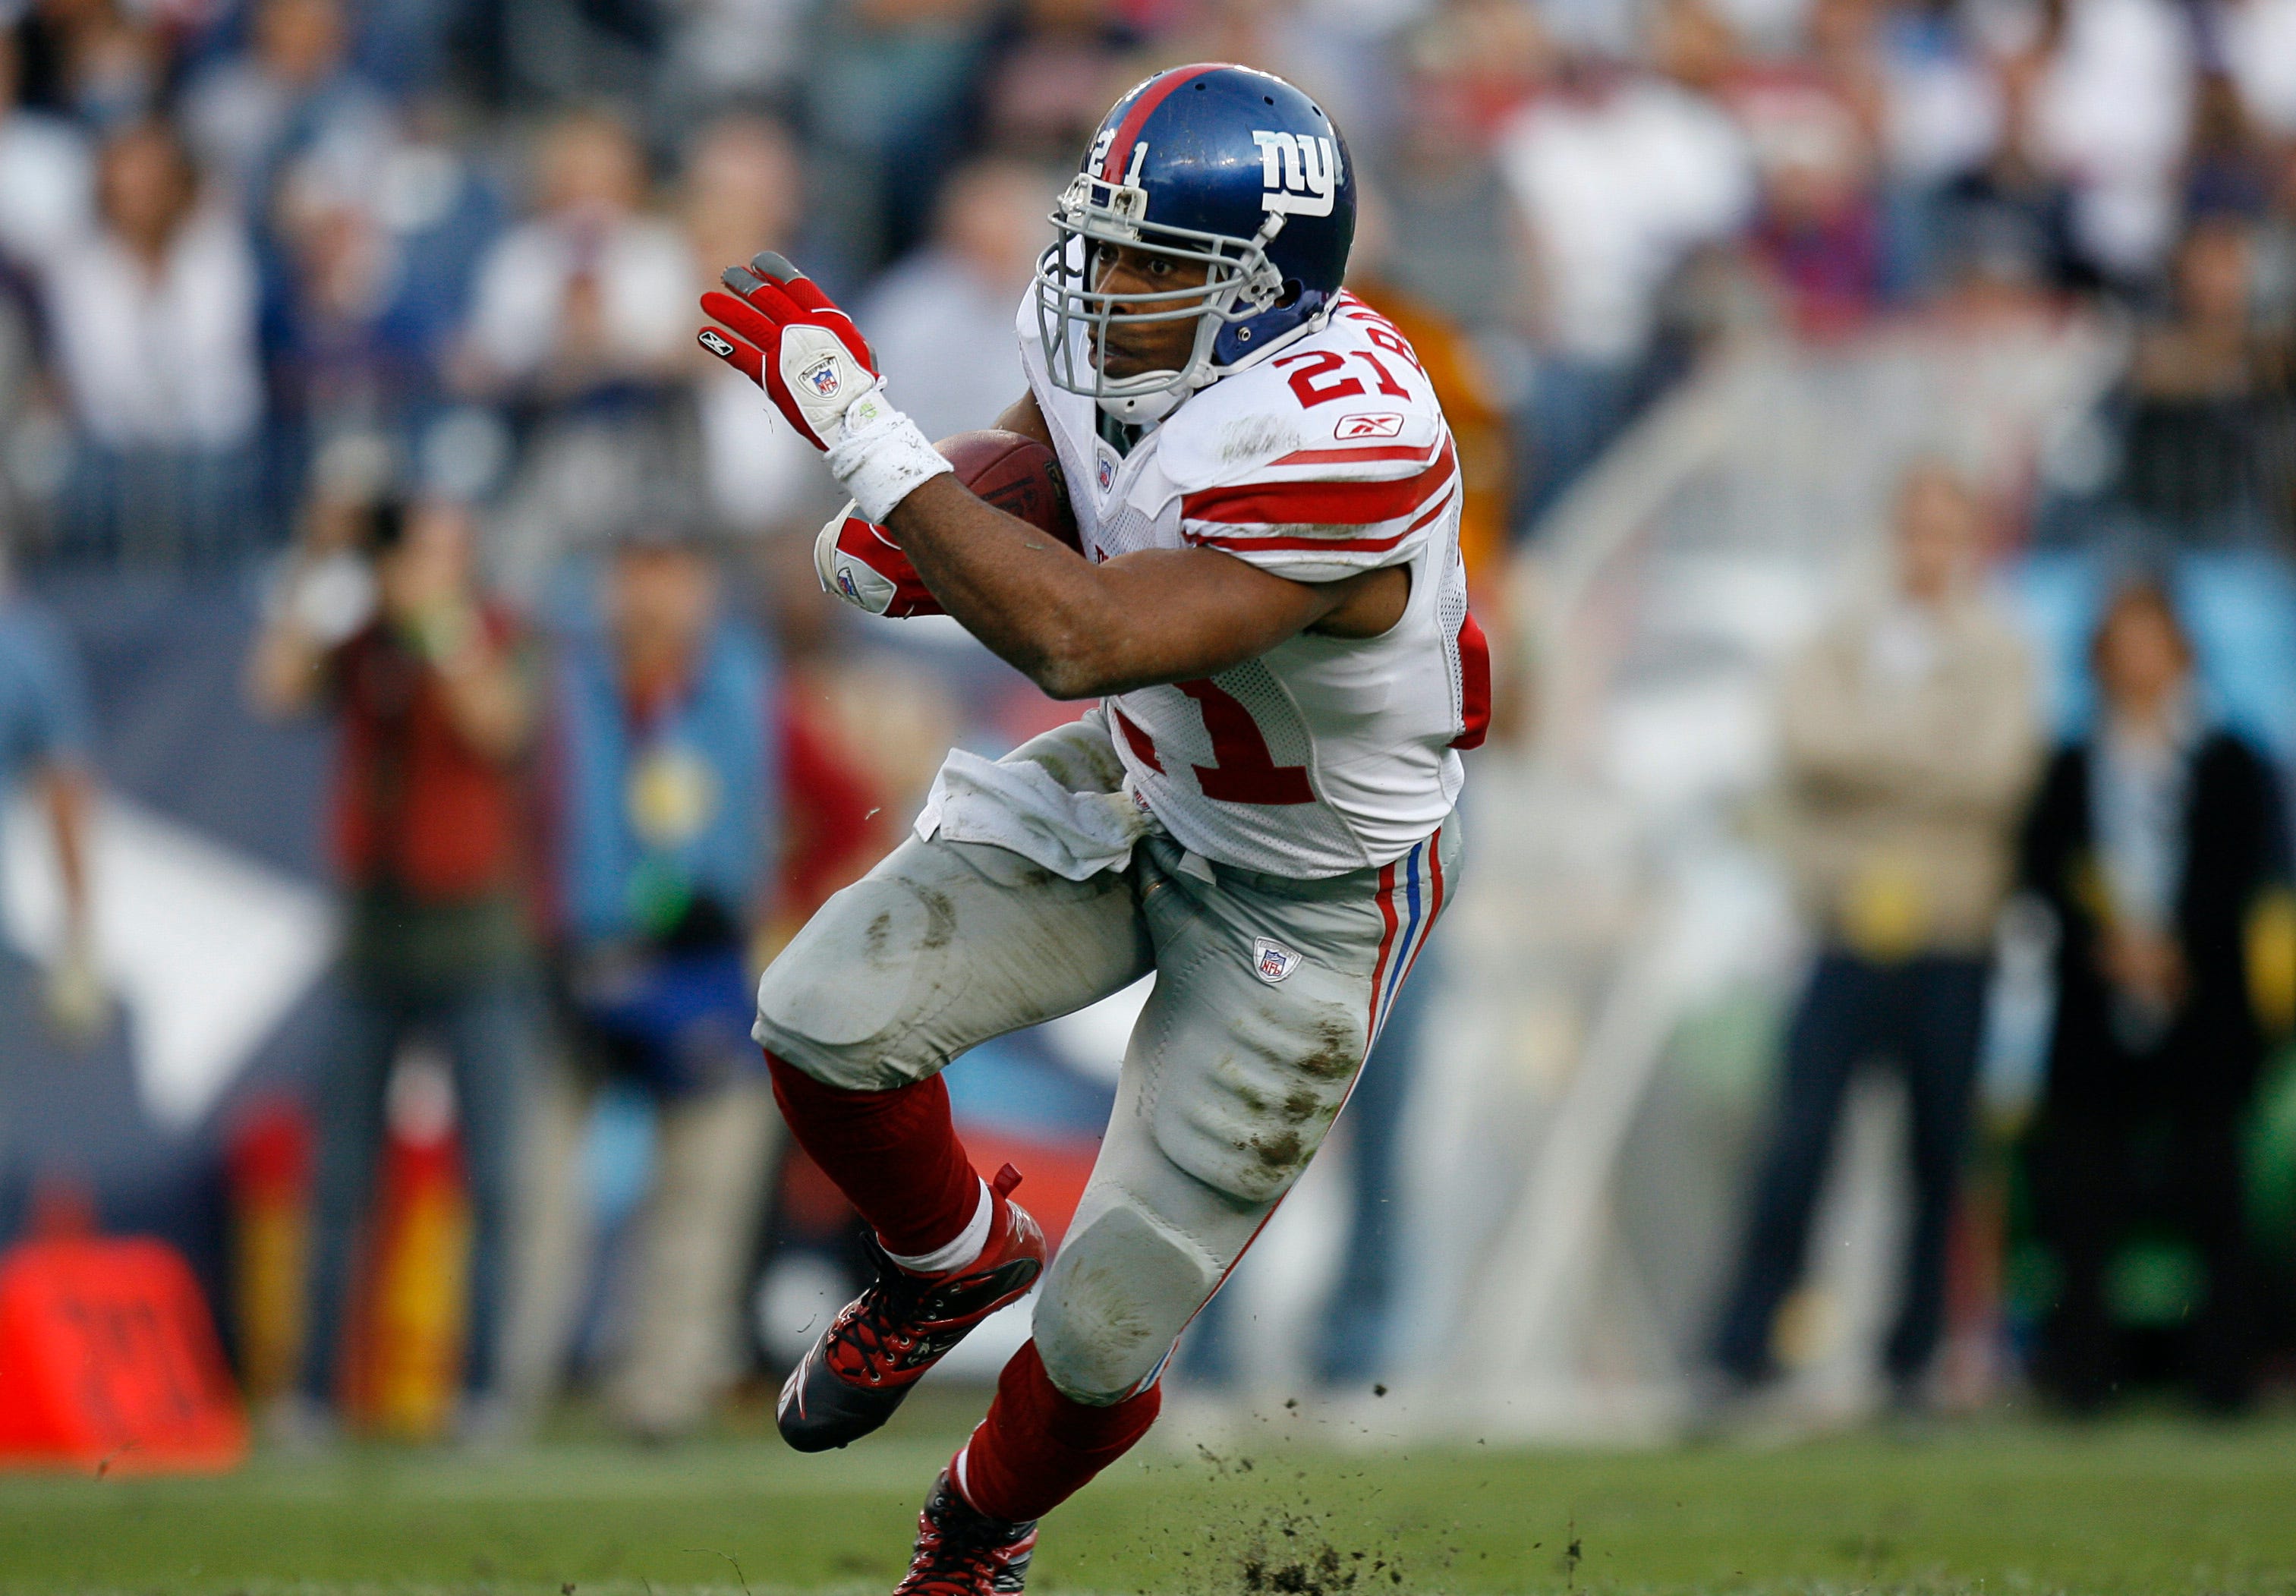 Tiki Barber defends Giants and Mara family in tearful video